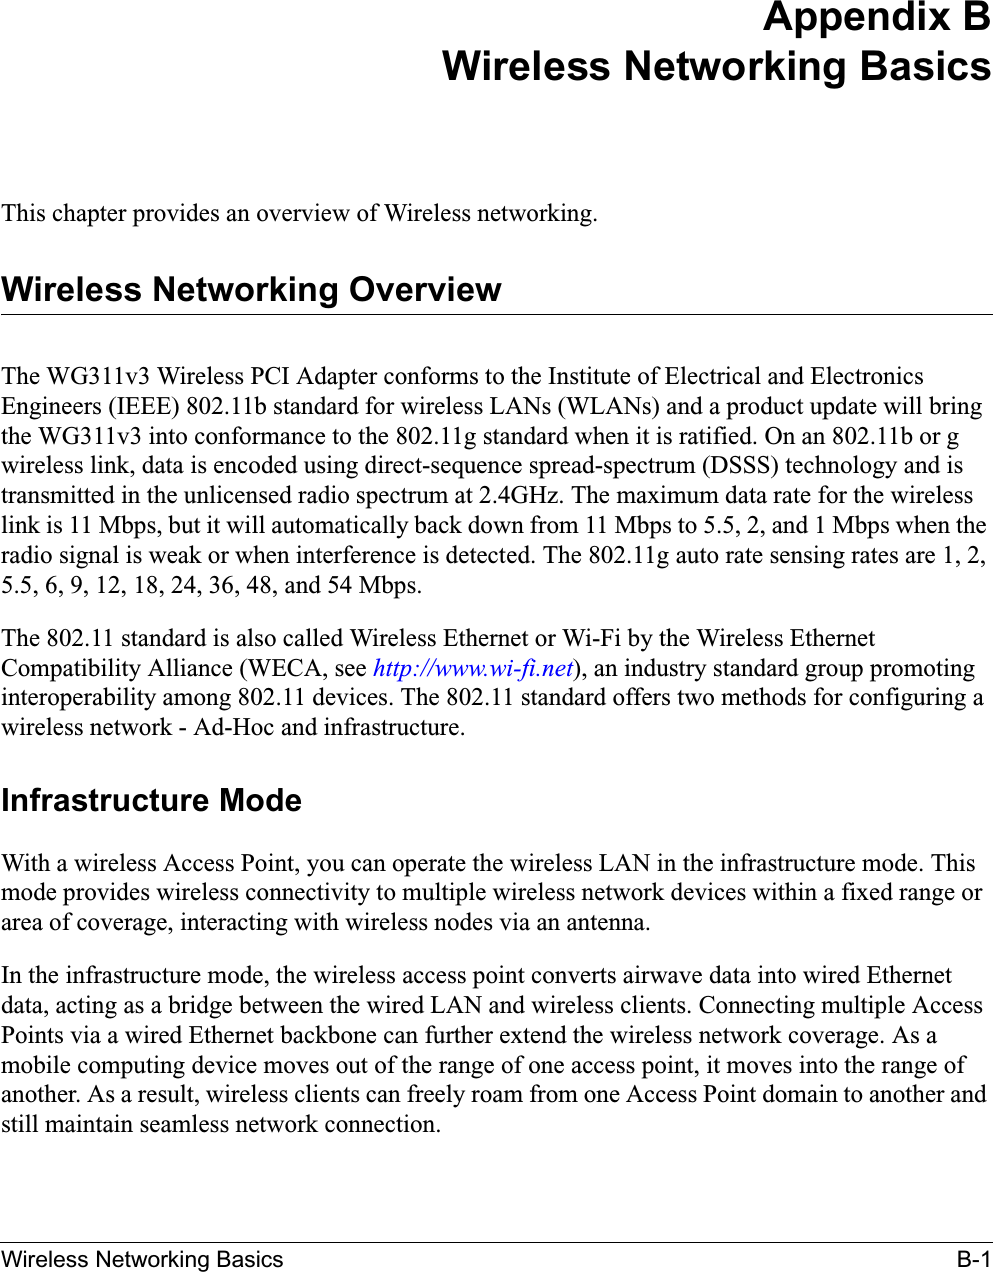 Wireless Networking Basics B-1Appendix BWireless Networking BasicsThis chapter provides an overview of Wireless networking.Wireless Networking OverviewThe WG311v3 Wireless PCI Adapter conforms to the Institute of Electrical and Electronics Engineers (IEEE) 802.11b standard for wireless LANs (WLANs) and a product update will bring the WG311v3 into conformance to the 802.11g standard when it is ratified. On an 802.11b or gwireless link, data is encoded using direct-sequence spread-spectrum (DSSS) technology and is transmitted in the unlicensed radio spectrum at 2.4GHz. The maximum data rate for the wireless link is 11 Mbps, but it will automatically back down from 11 Mbps to 5.5, 2, and 1 Mbps when the radio signal is weak or when interference is detected. The 802.11g auto rate sensing rates are 1, 2, 5.5, 6, 9, 12, 18, 24, 36, 48, and 54 Mbps.The 802.11 standard is also called Wireless Ethernet or Wi-Fi by the Wireless Ethernet Compatibility Alliance (WECA, see http://www.wi-fi.net), an industry standard group promoting interoperability among 802.11 devices. The 802.11 standard offers two methods for configuring a wireless network - Ad-Hoc and infrastructure.Infrastructure ModeWith a wireless Access Point, you can operate the wireless LAN in the infrastructure mode. This mode provides wireless connectivity to multiple wireless network devices within a fixed range or area of coverage, interacting with wireless nodes via an antenna. In the infrastructure mode, the wireless access point converts airwave data into wired Ethernet data, acting as a bridge between the wired LAN and wireless clients. Connecting multiple Access Points via a wired Ethernet backbone can further extend the wireless network coverage. As a mobile computing device moves out of the range of one access point, it moves into the range of another. As a result, wireless clients can freely roam from one Access Point domain to another and still maintain seamless network connection.